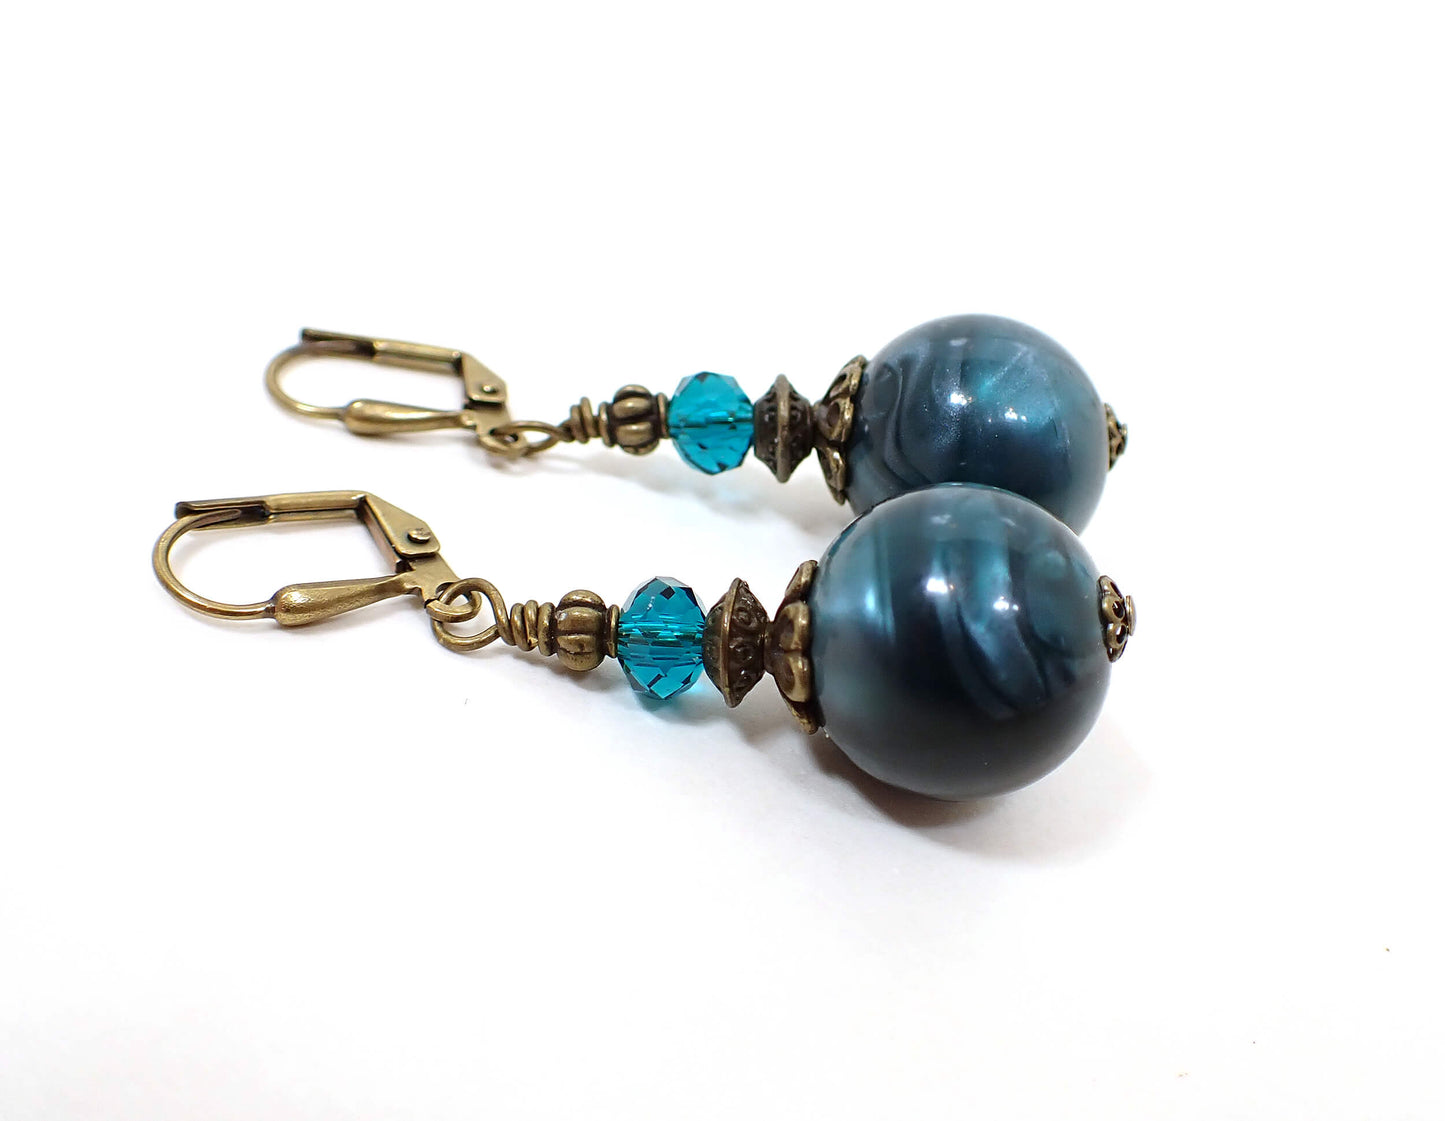 Antiqued Brass Handmade Pearly Teal Blue Lucite Drop Earrings Hook Lever Back or Clip On